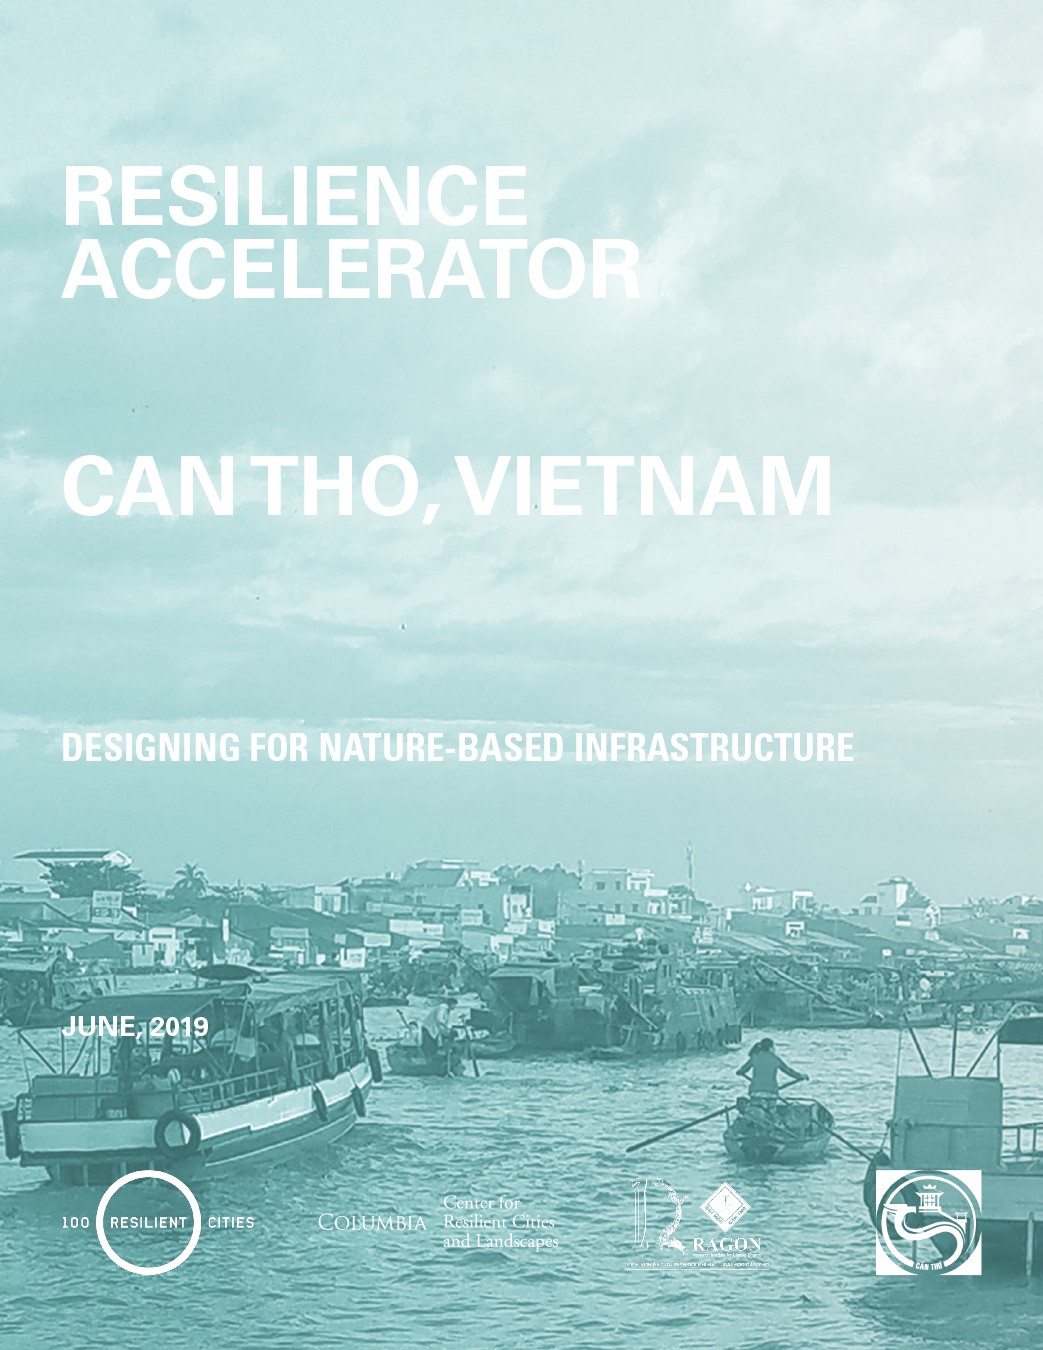 Can Tho Resilience Accelerator